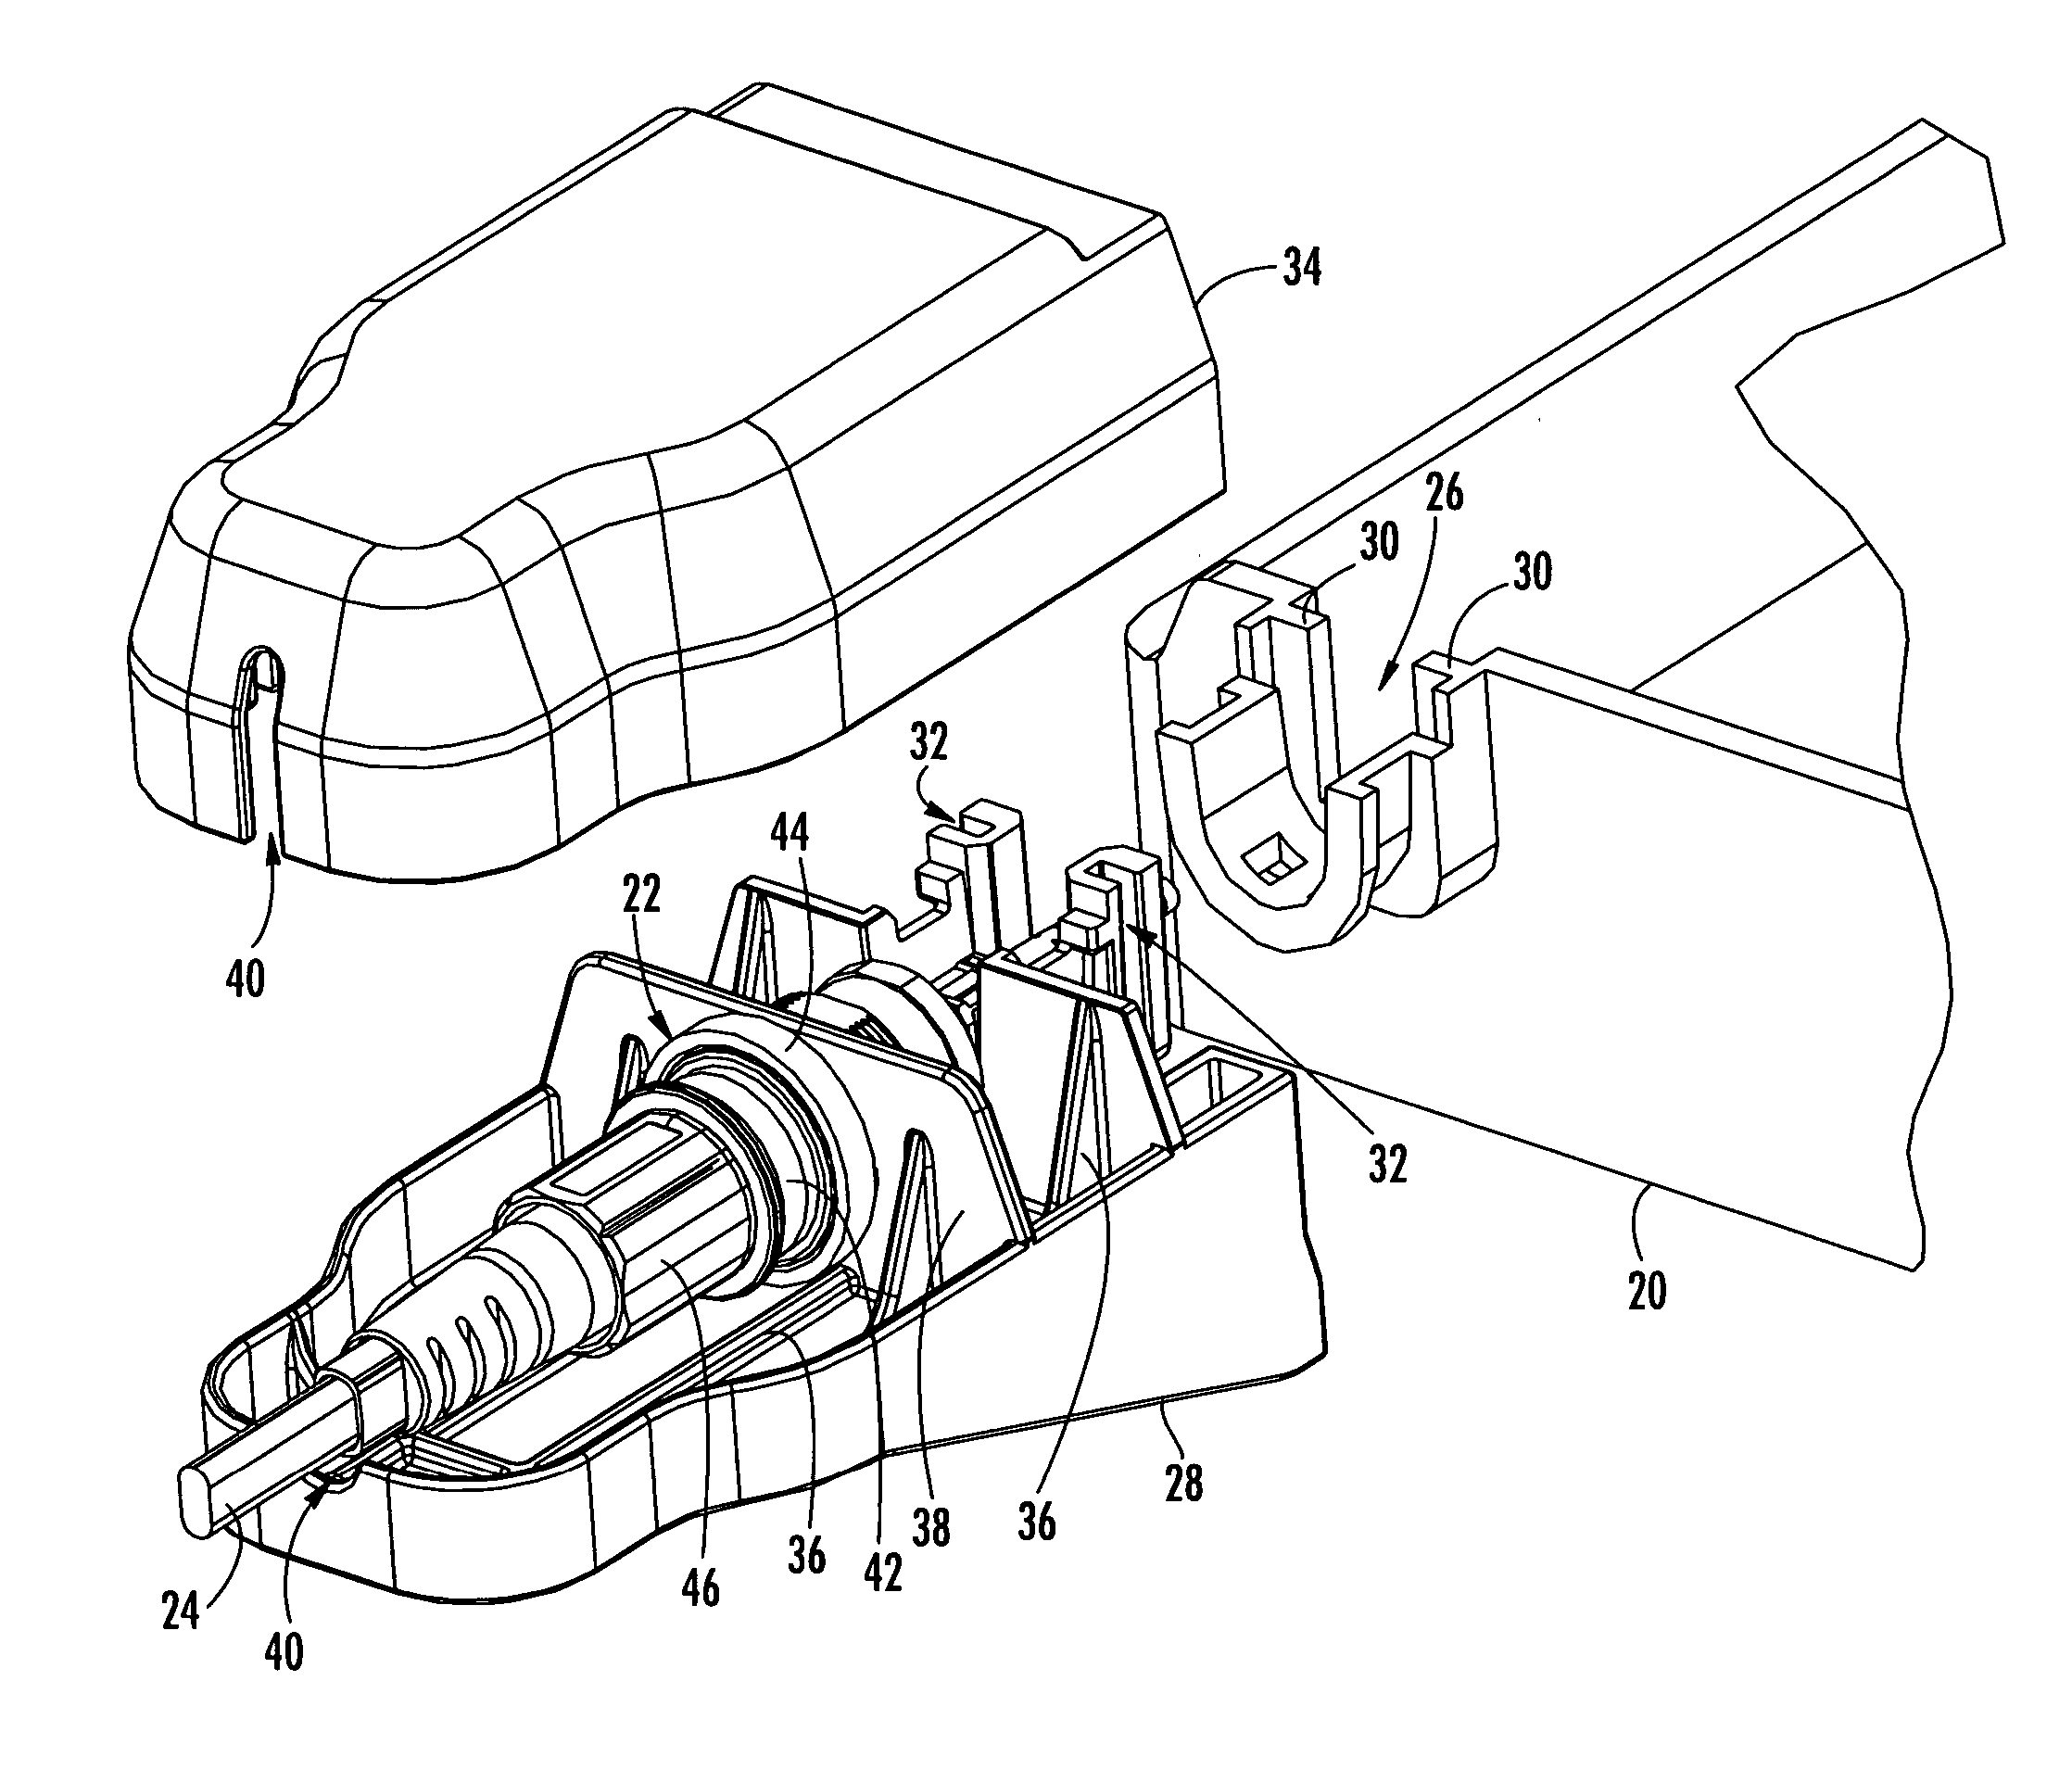 Connector port for network interface device